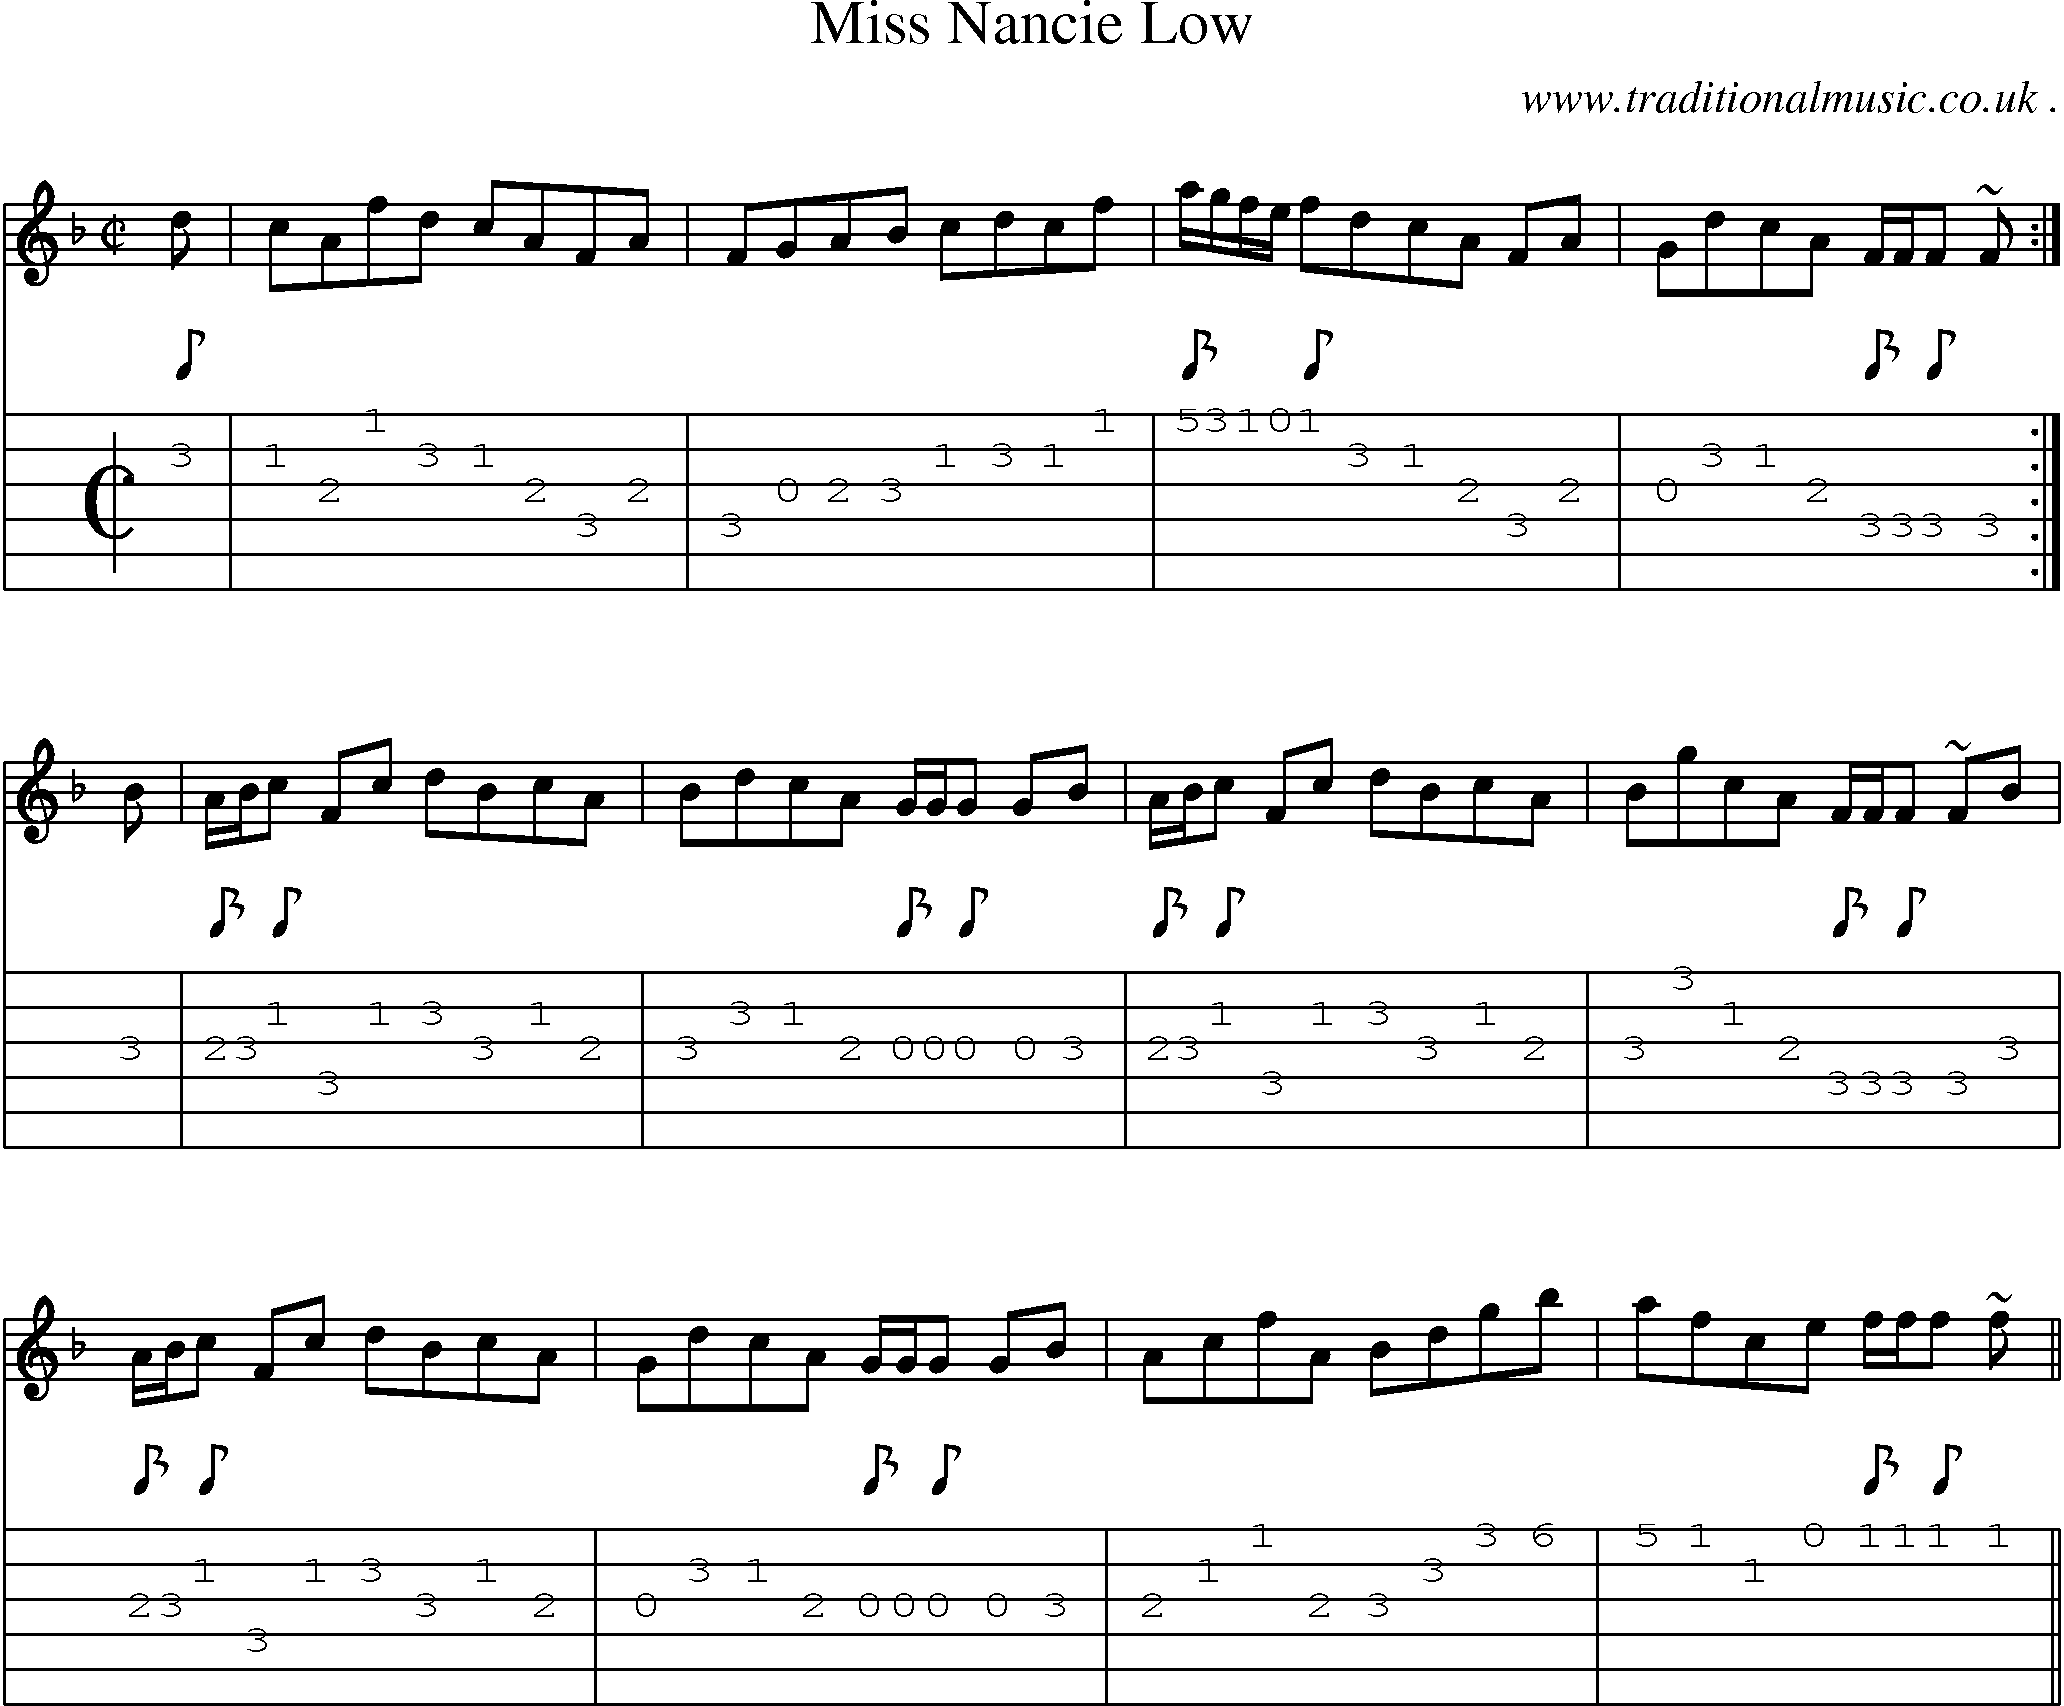 Sheet-music  score, Chords and Guitar Tabs for Miss Nancie Low